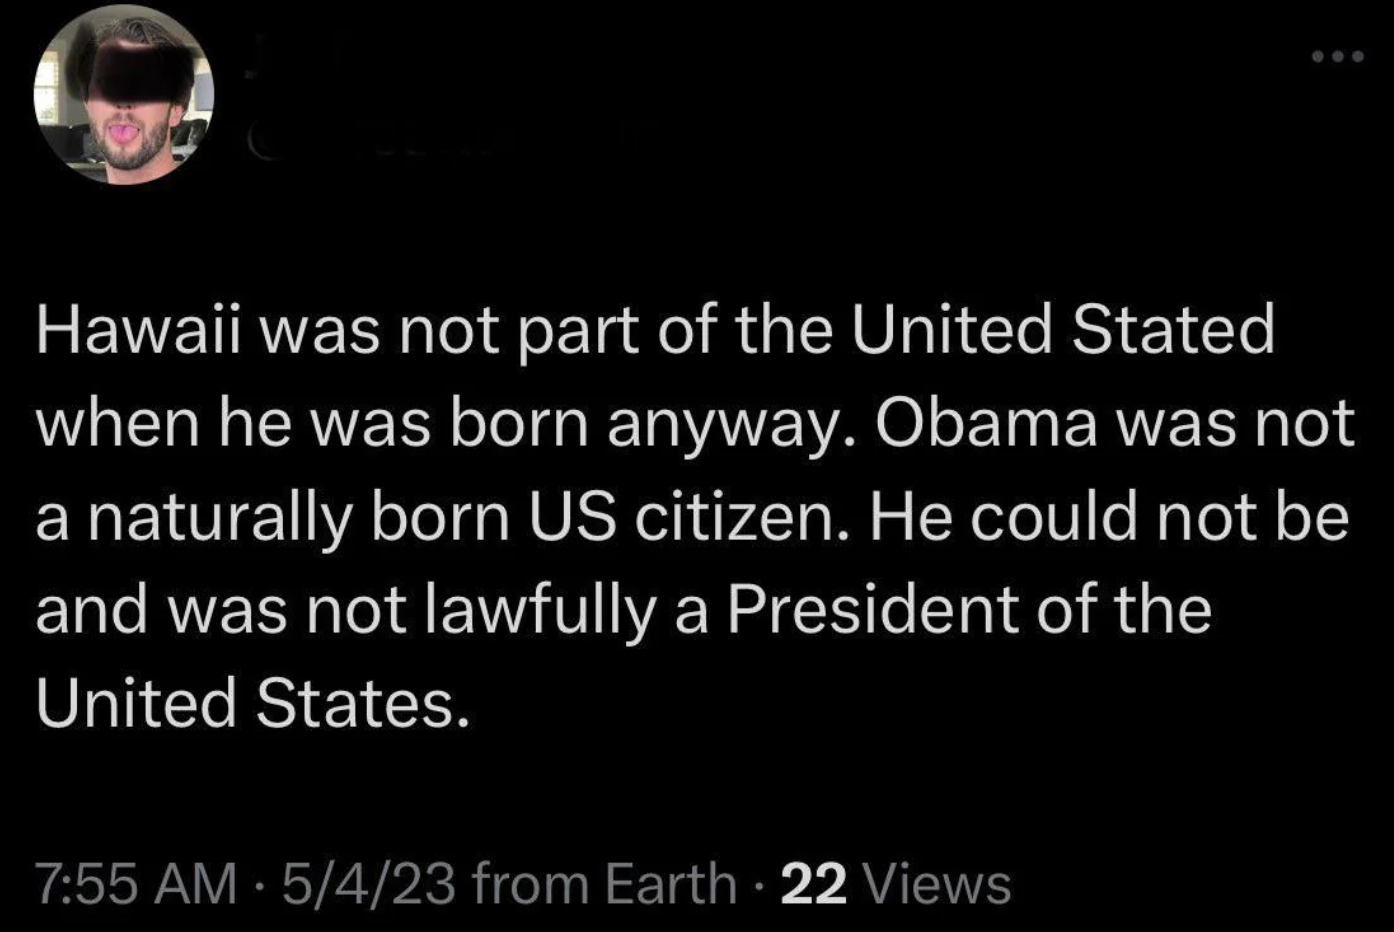 screenshot - Hawaii was not part of the United Stated when he was born anyway. Obama was not a naturally born Us citizen. He could not be and was not lawfully a President of the United States. 5423 from Earth 22 Views